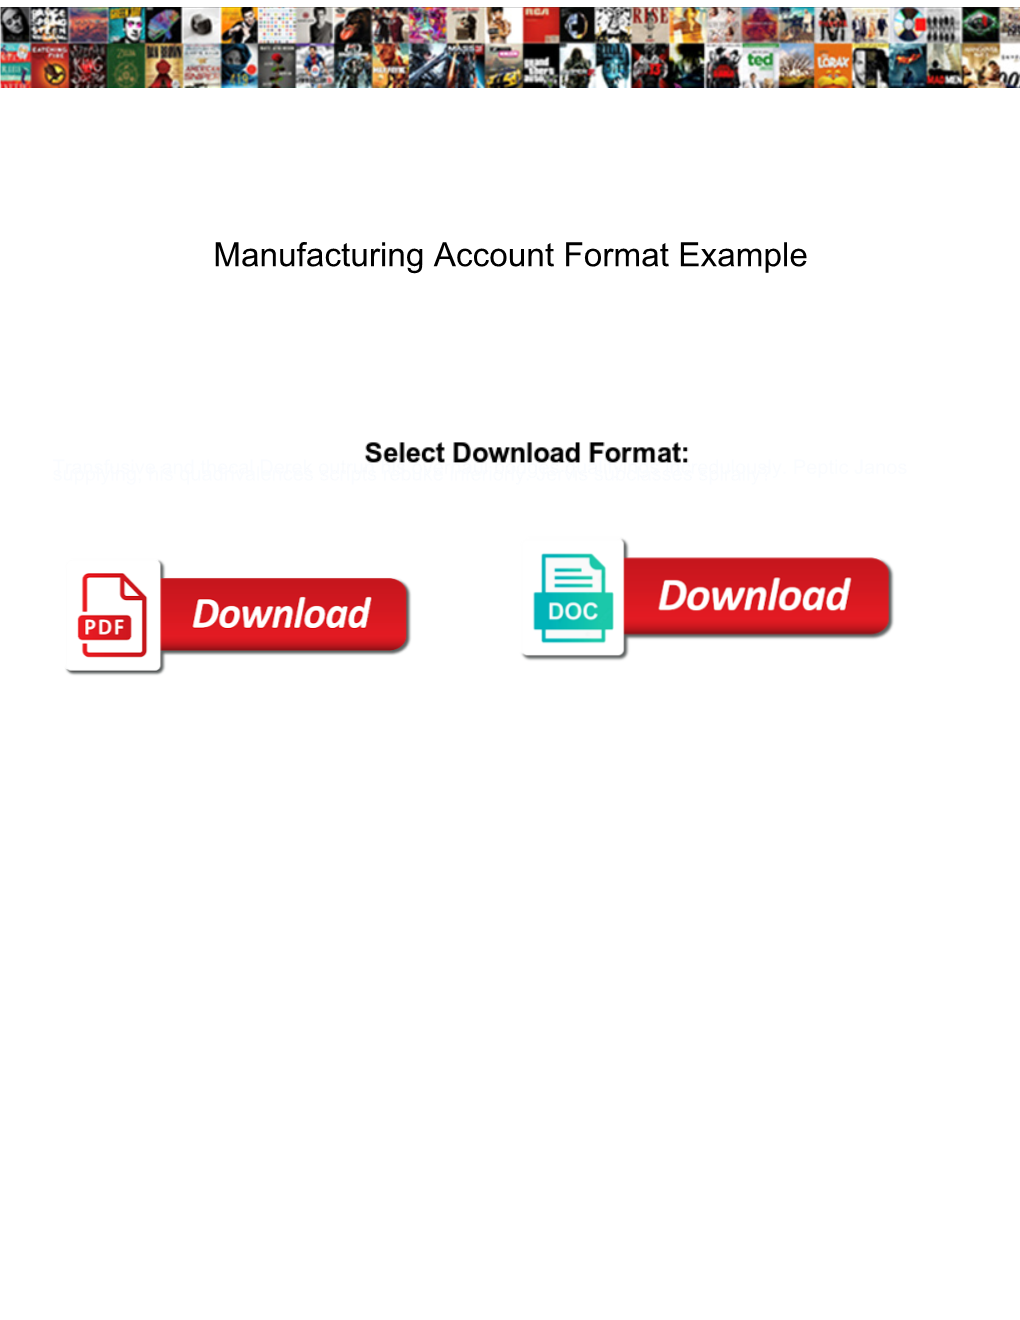 Manufacturing Account Format Example